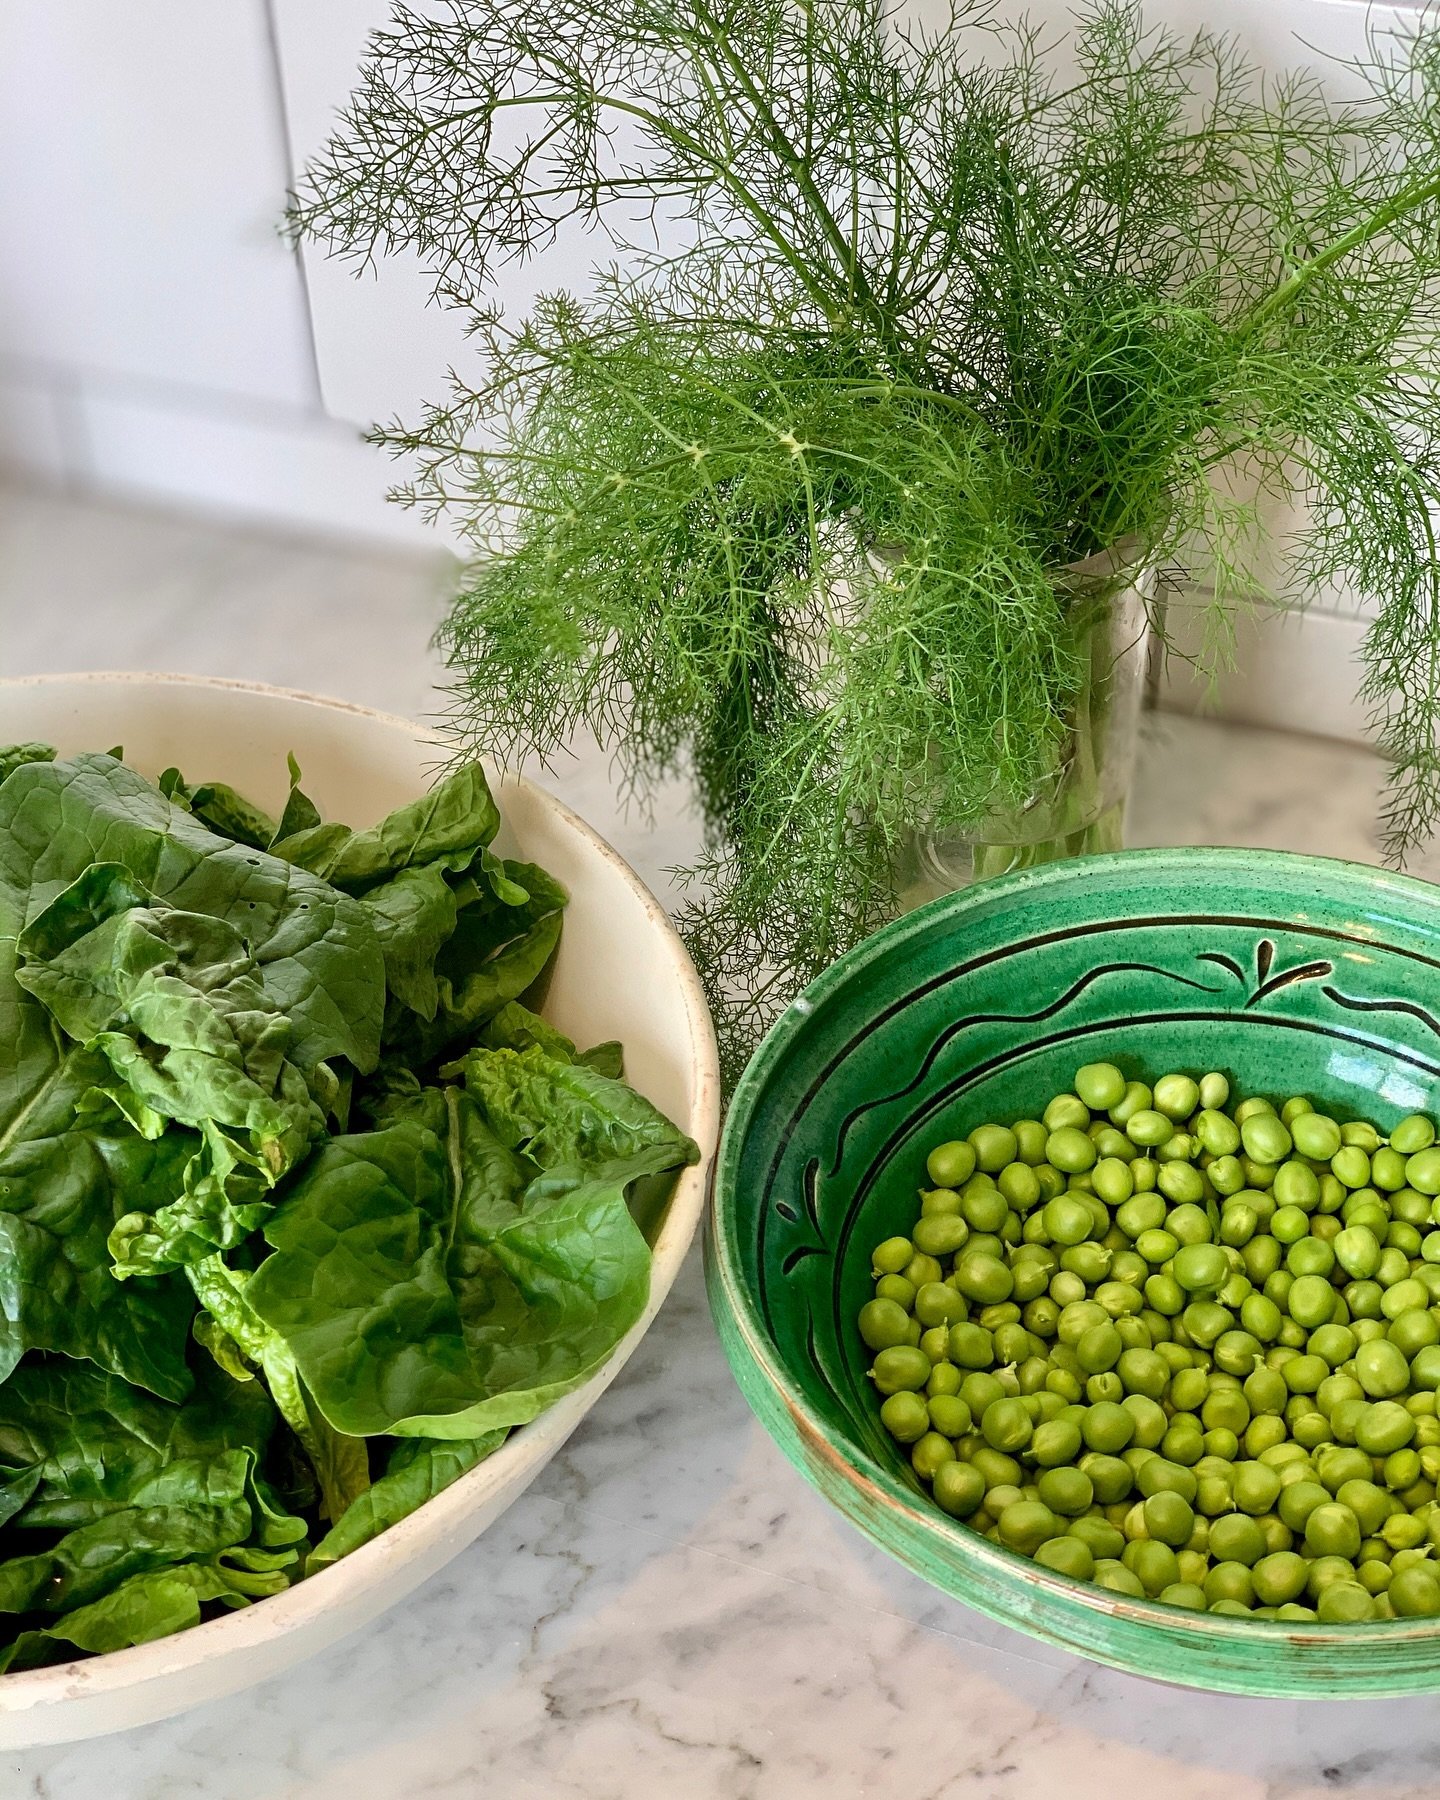 Spring time means green time in our kitchen. Green peas and spinach is good for the eye and for the body.

#gonesolta
#spring #peas #spinach
#travel #traveling #travelpics #travelInspiration 
#vacation #vacations #vacationmode #vacationtime
#thebestd